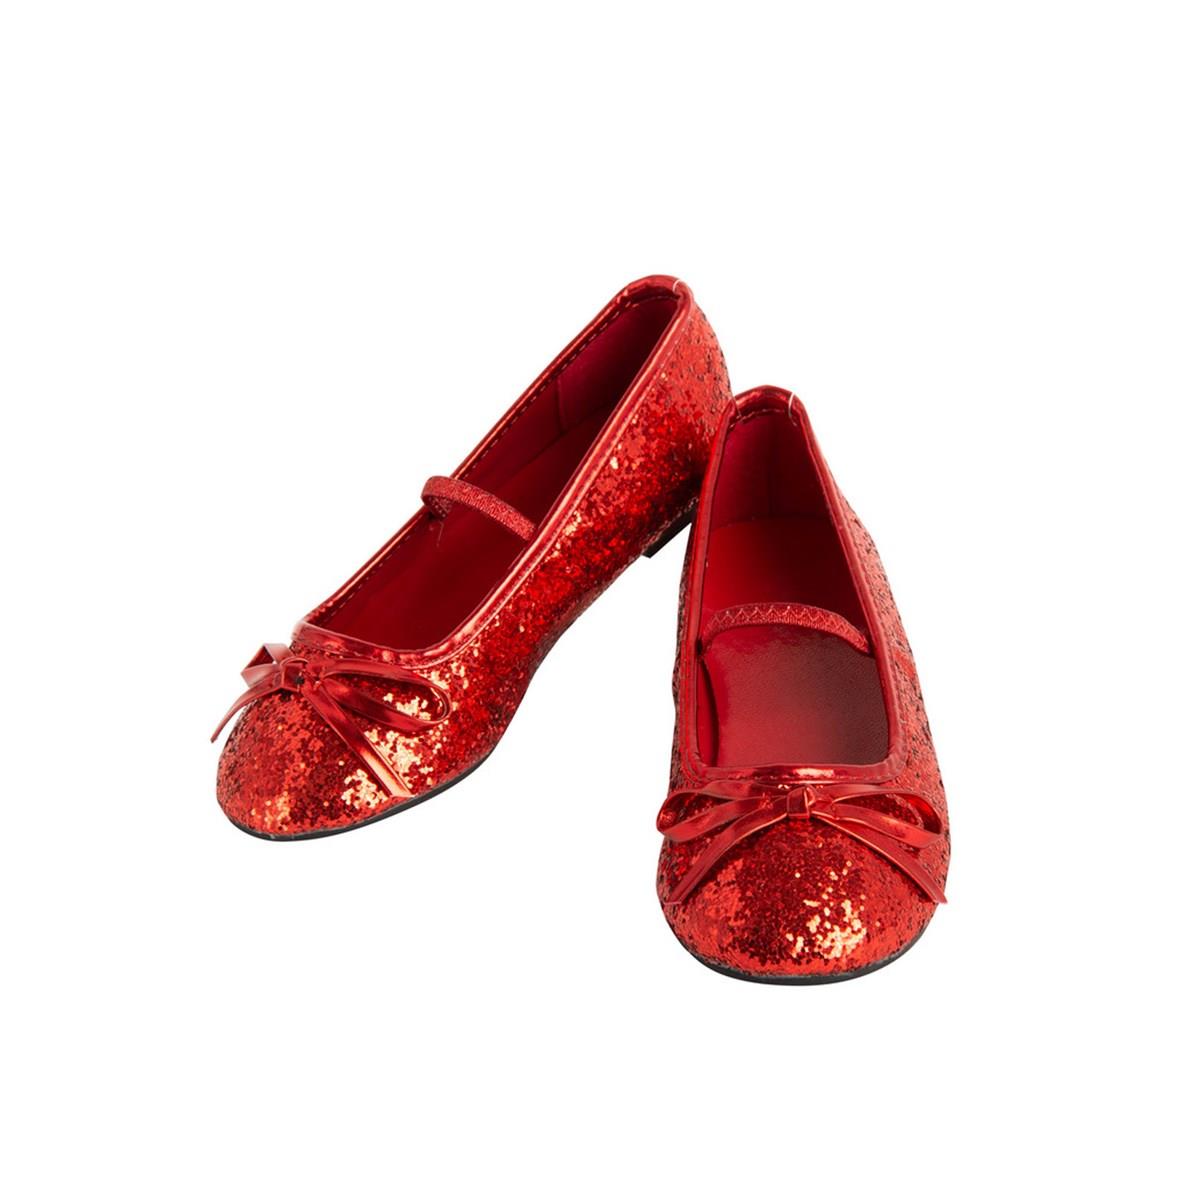 Picture of Rubies 278318 Girls Ballet Shoe - Red, Size 11-12